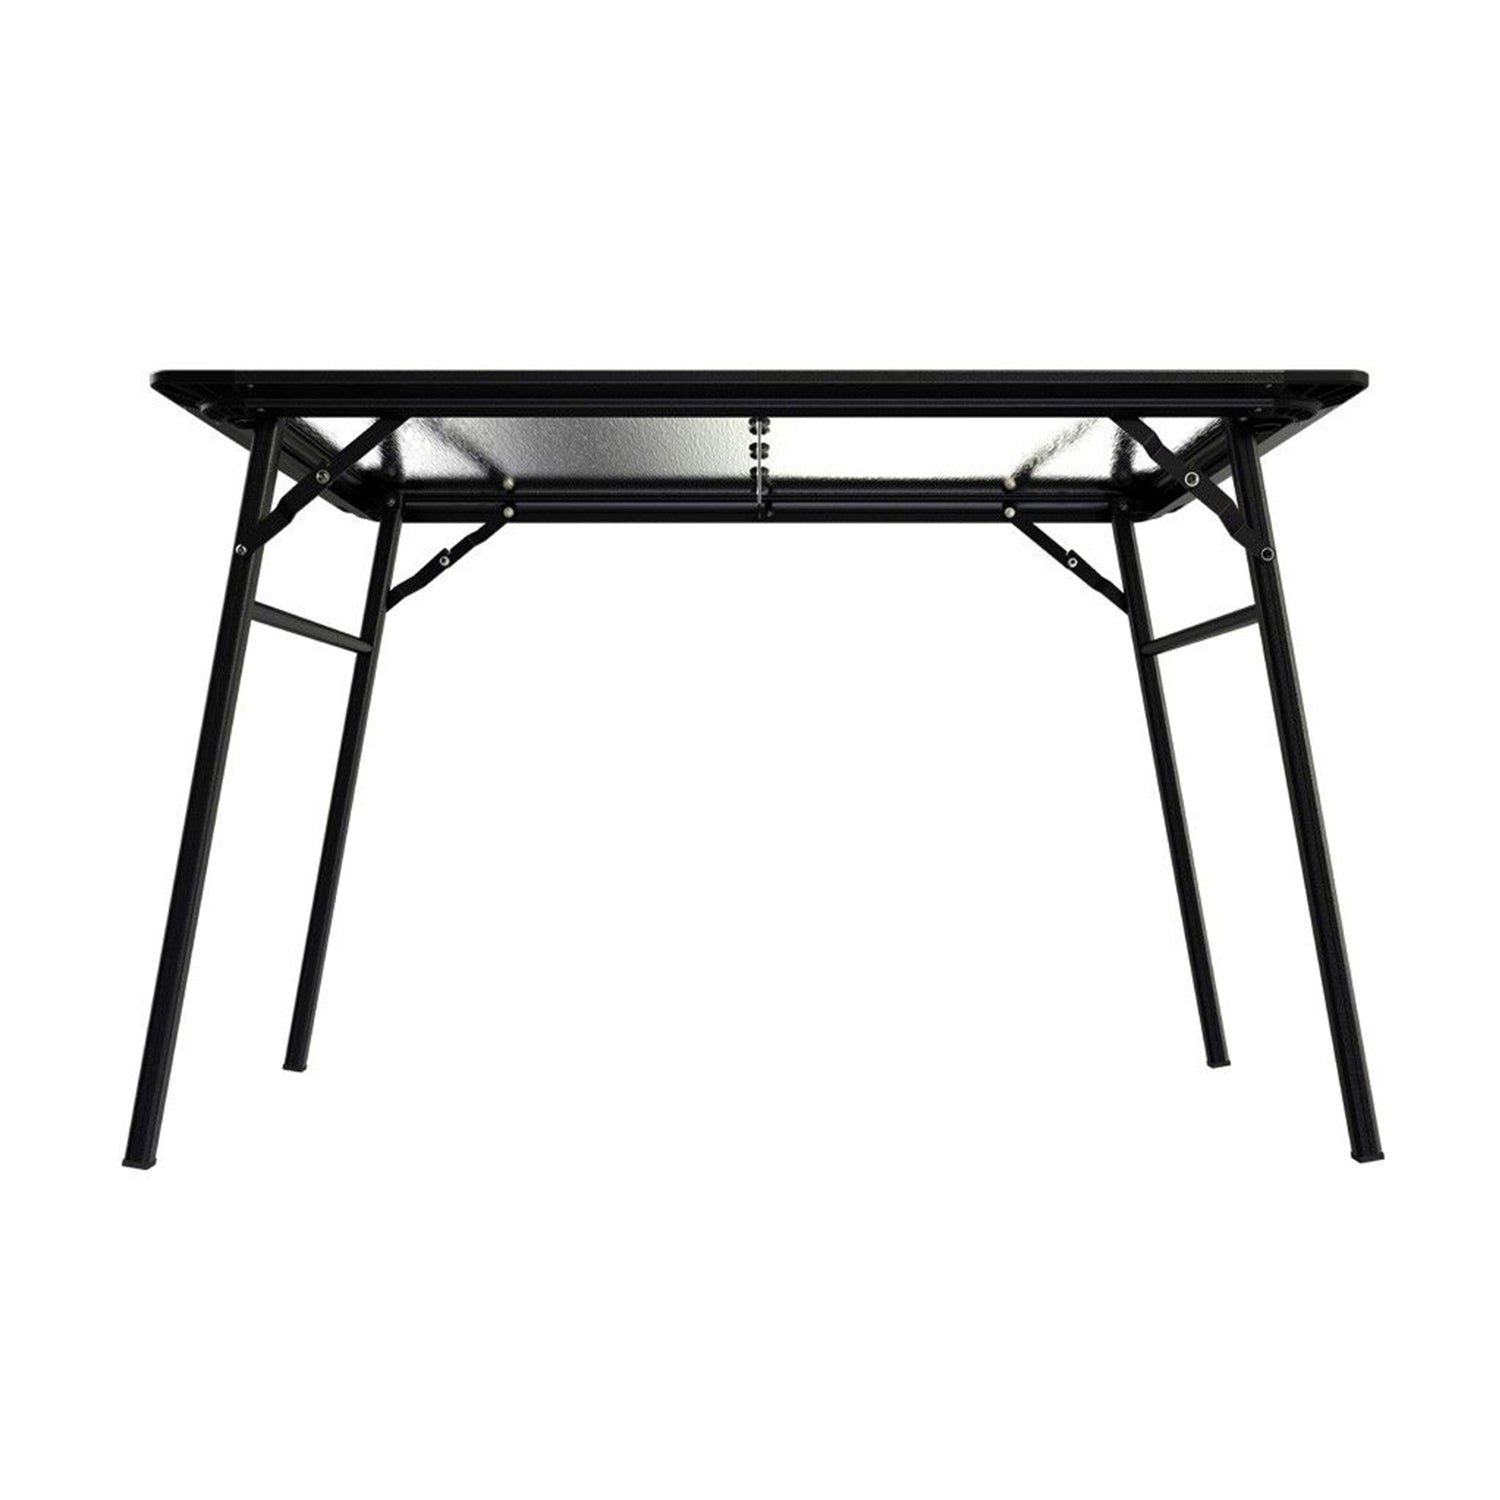 Front Runner Pro Stainless Steel Camp Table / Pro Stainless Steel Camp Table